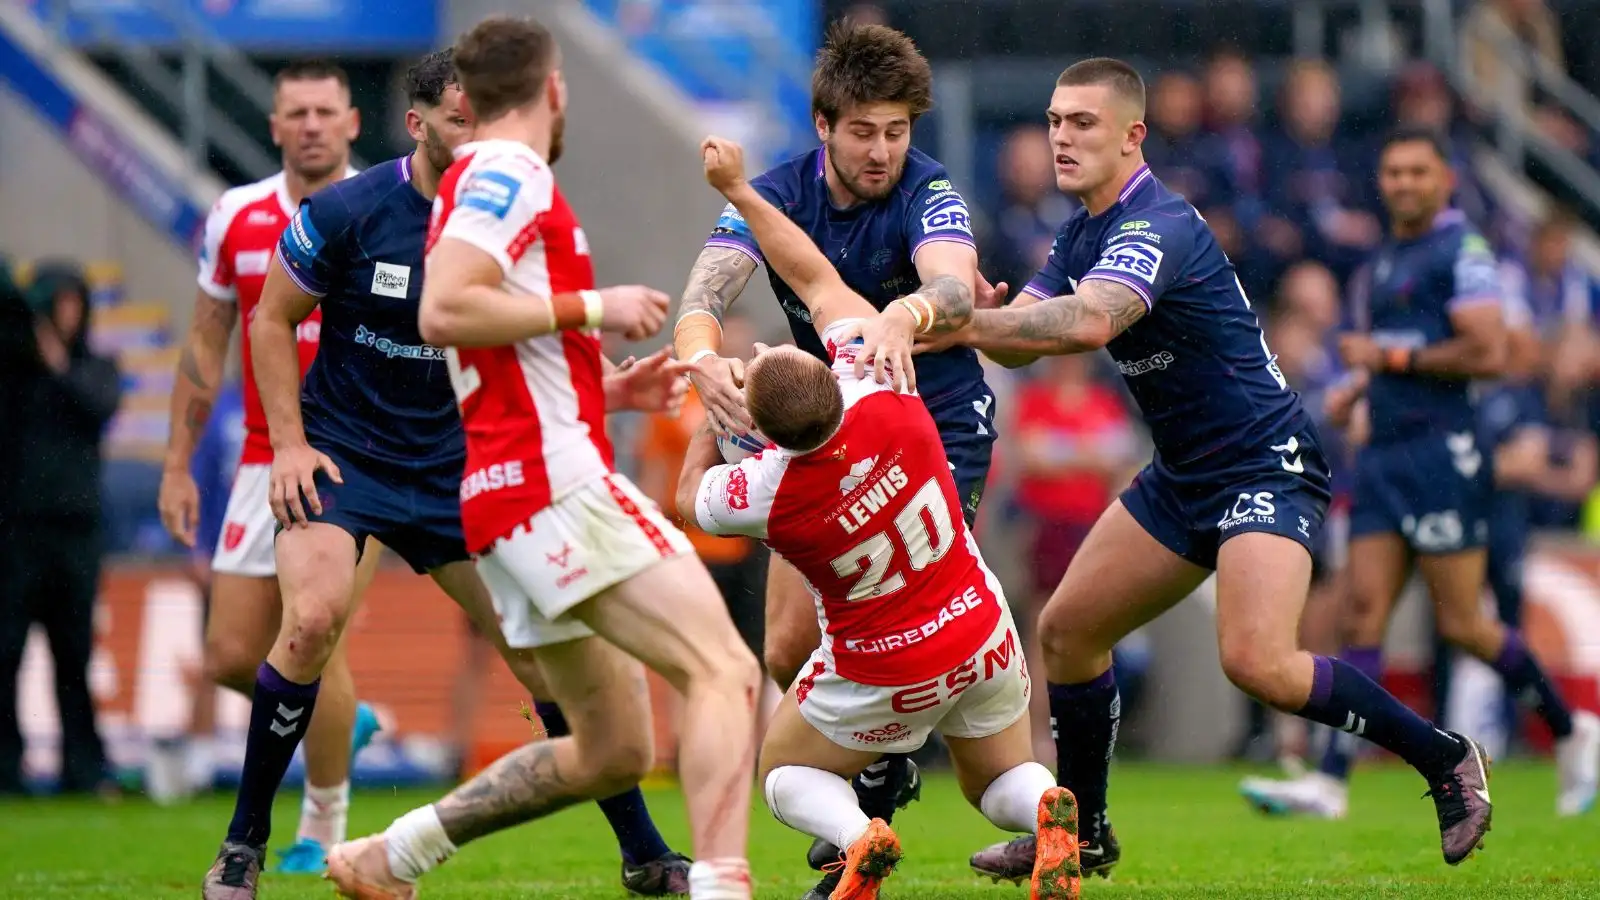 Wigan Warriors head coach Matt Peet has reacted to Joe Shorrocks' red card during the Challenge Cup tie with Hull KR. Photo by PA Images / Alamy Stock Photo.